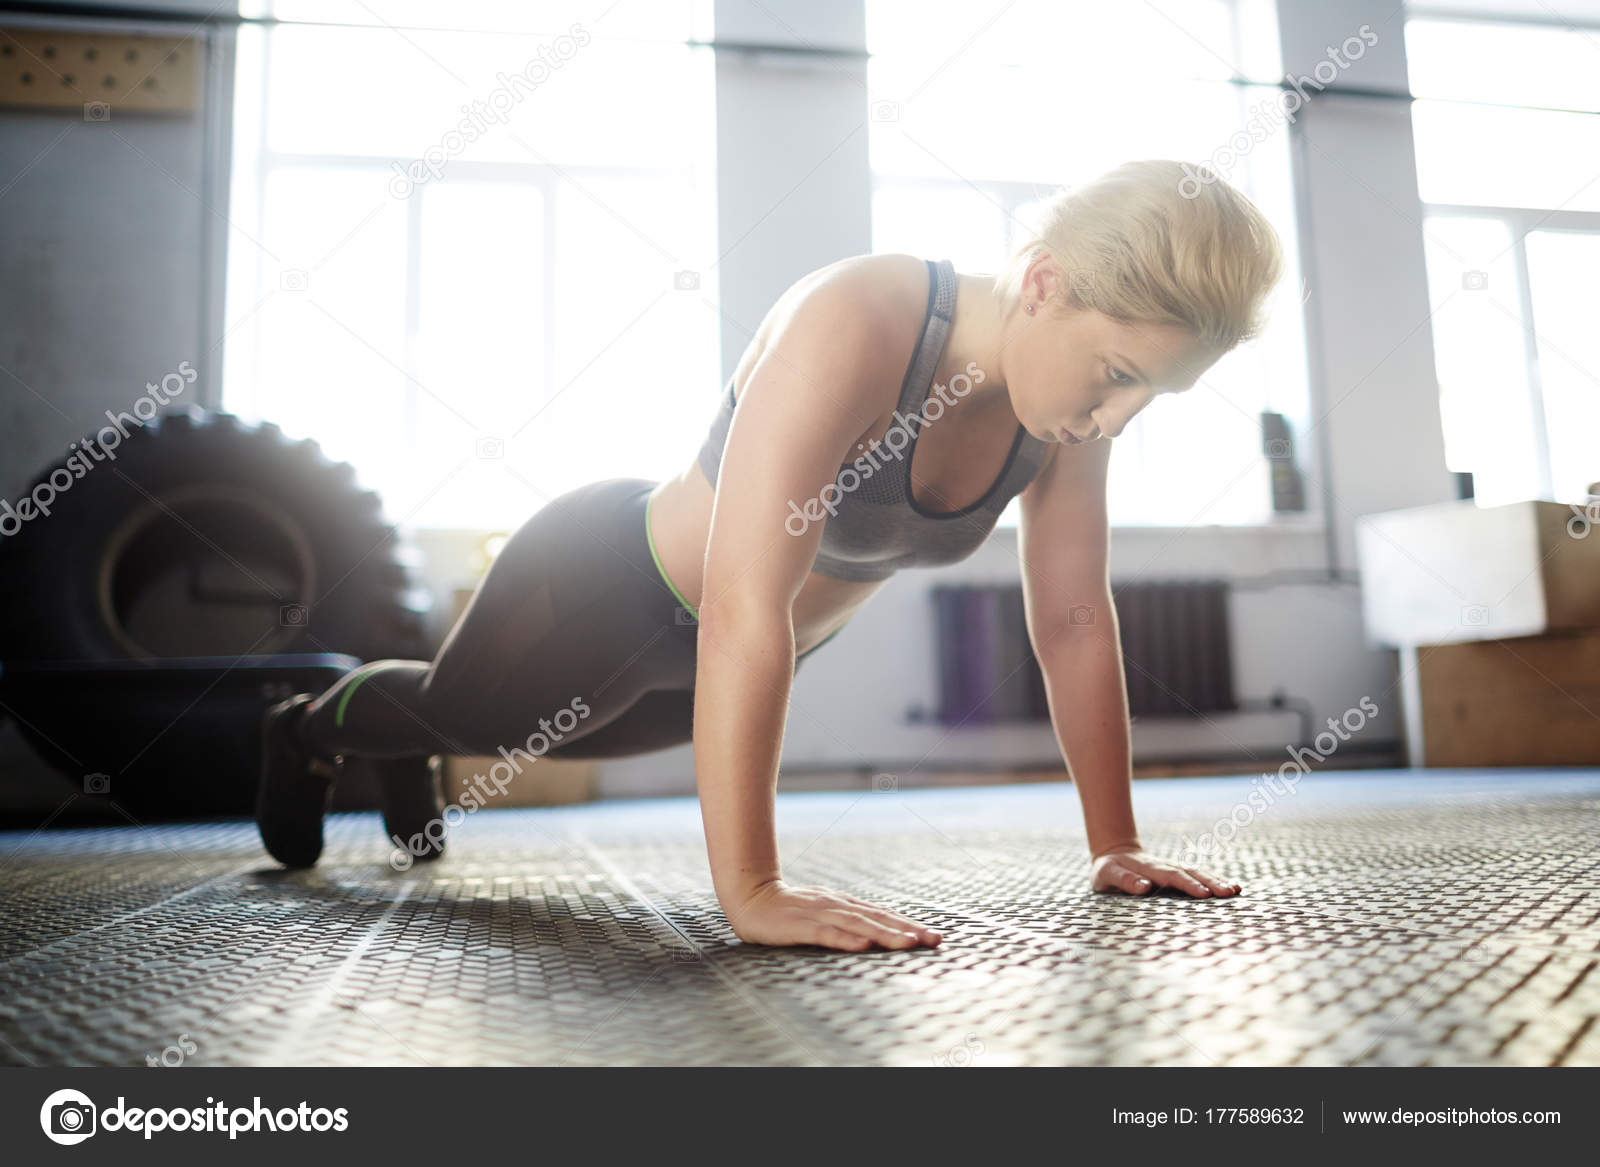 Attractive Young Woman Wrapped Fitness Training She Doing Plank Exercise Stock Photo C Pressmaster